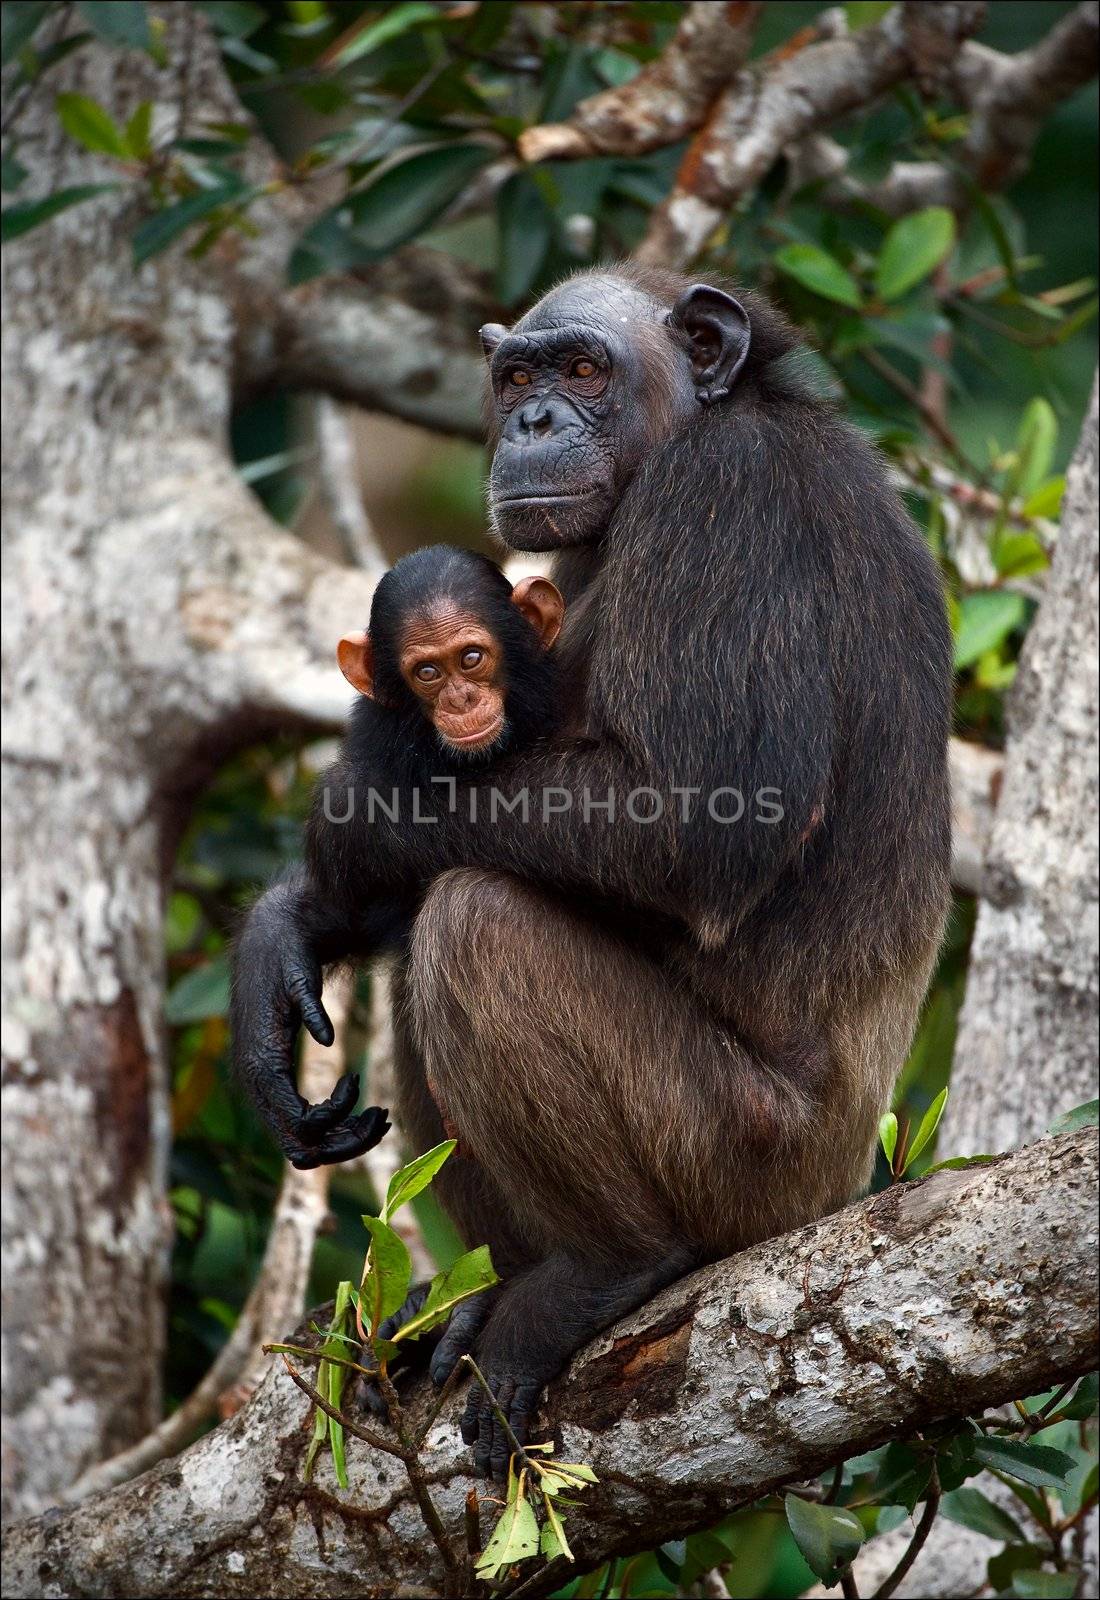 Chimpanzee with a cub on mangrove branches. by SURZ